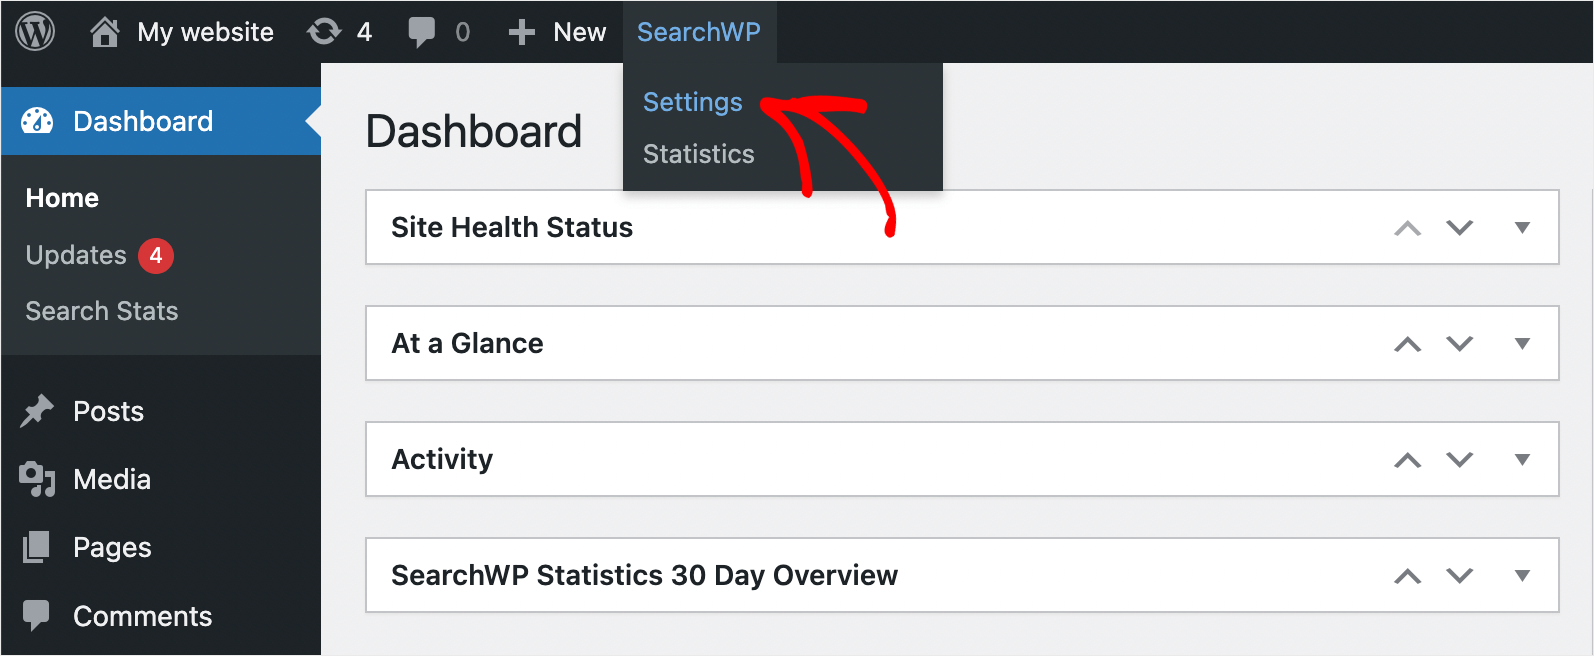 go over to the SearchWP settings